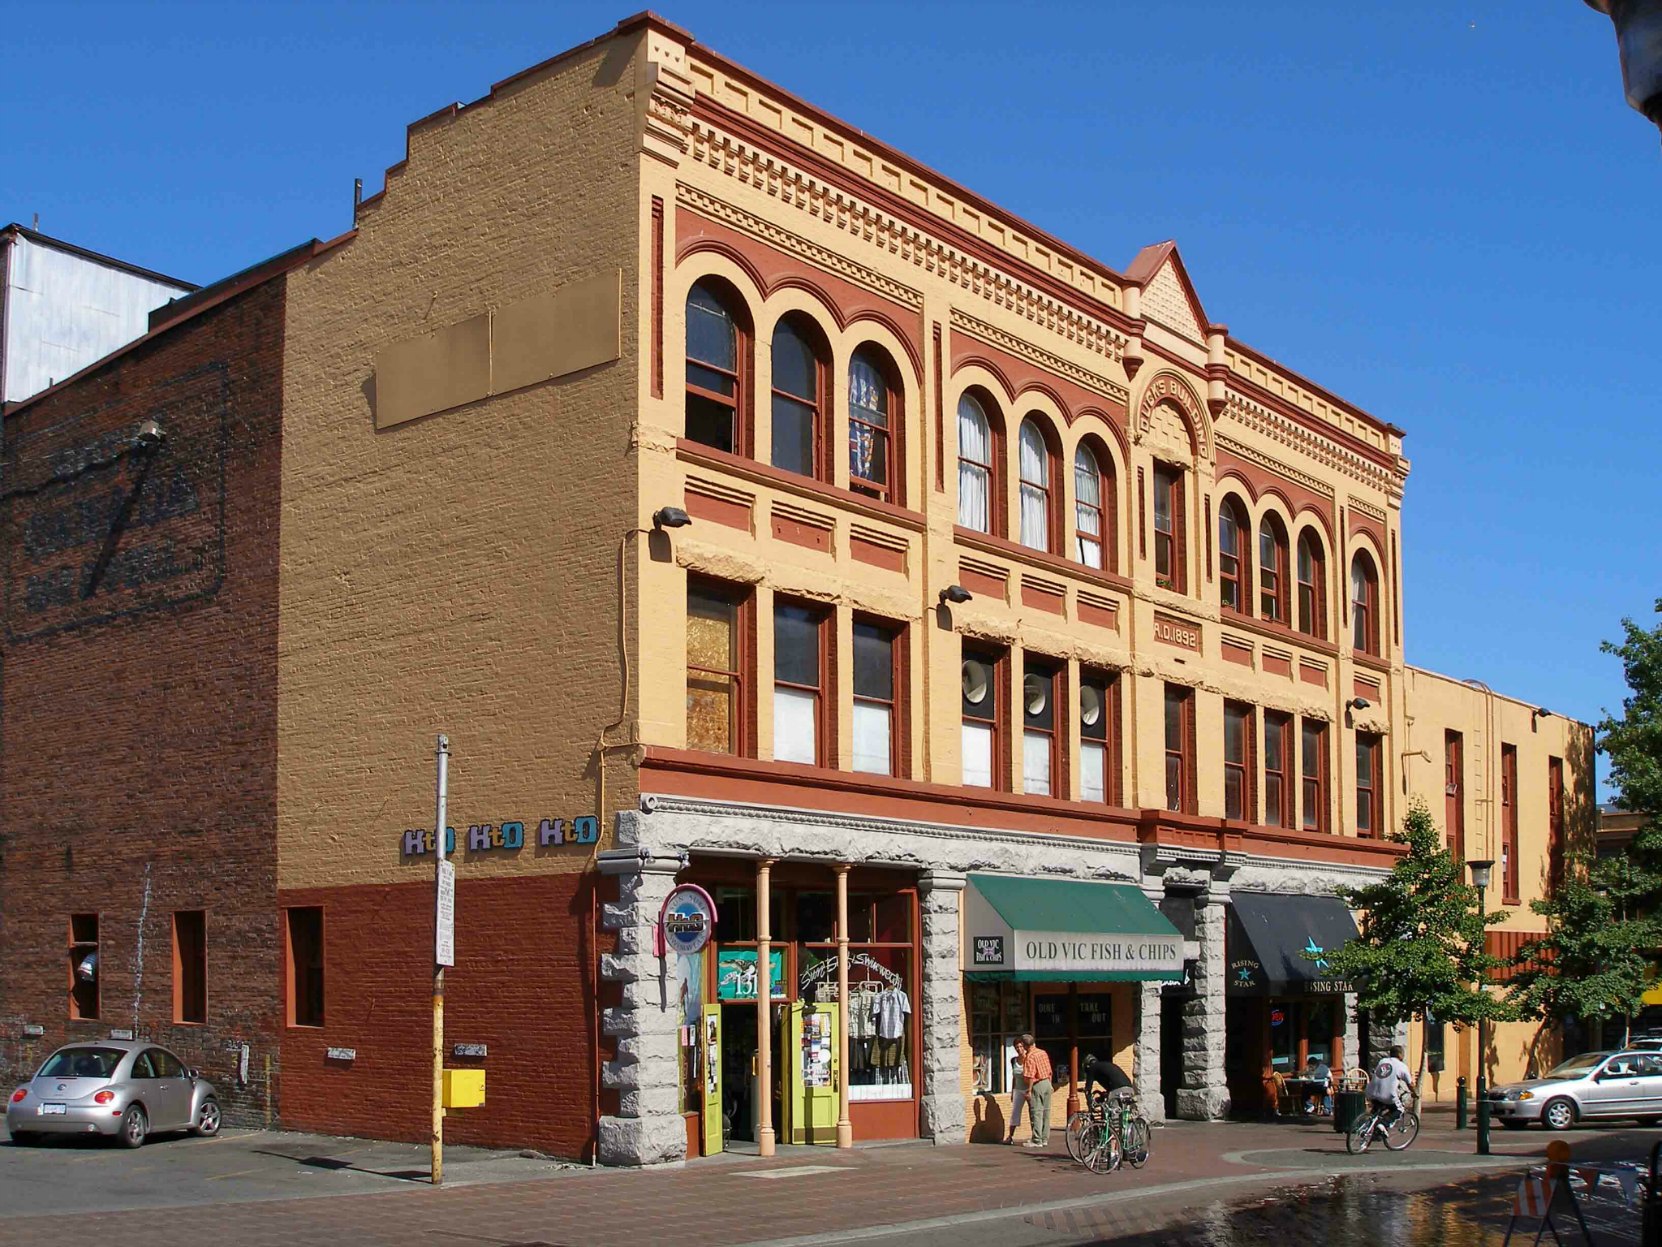 The Duck's Building, 1314-1322 Broad Street, built in 1892 for Simeon Duck